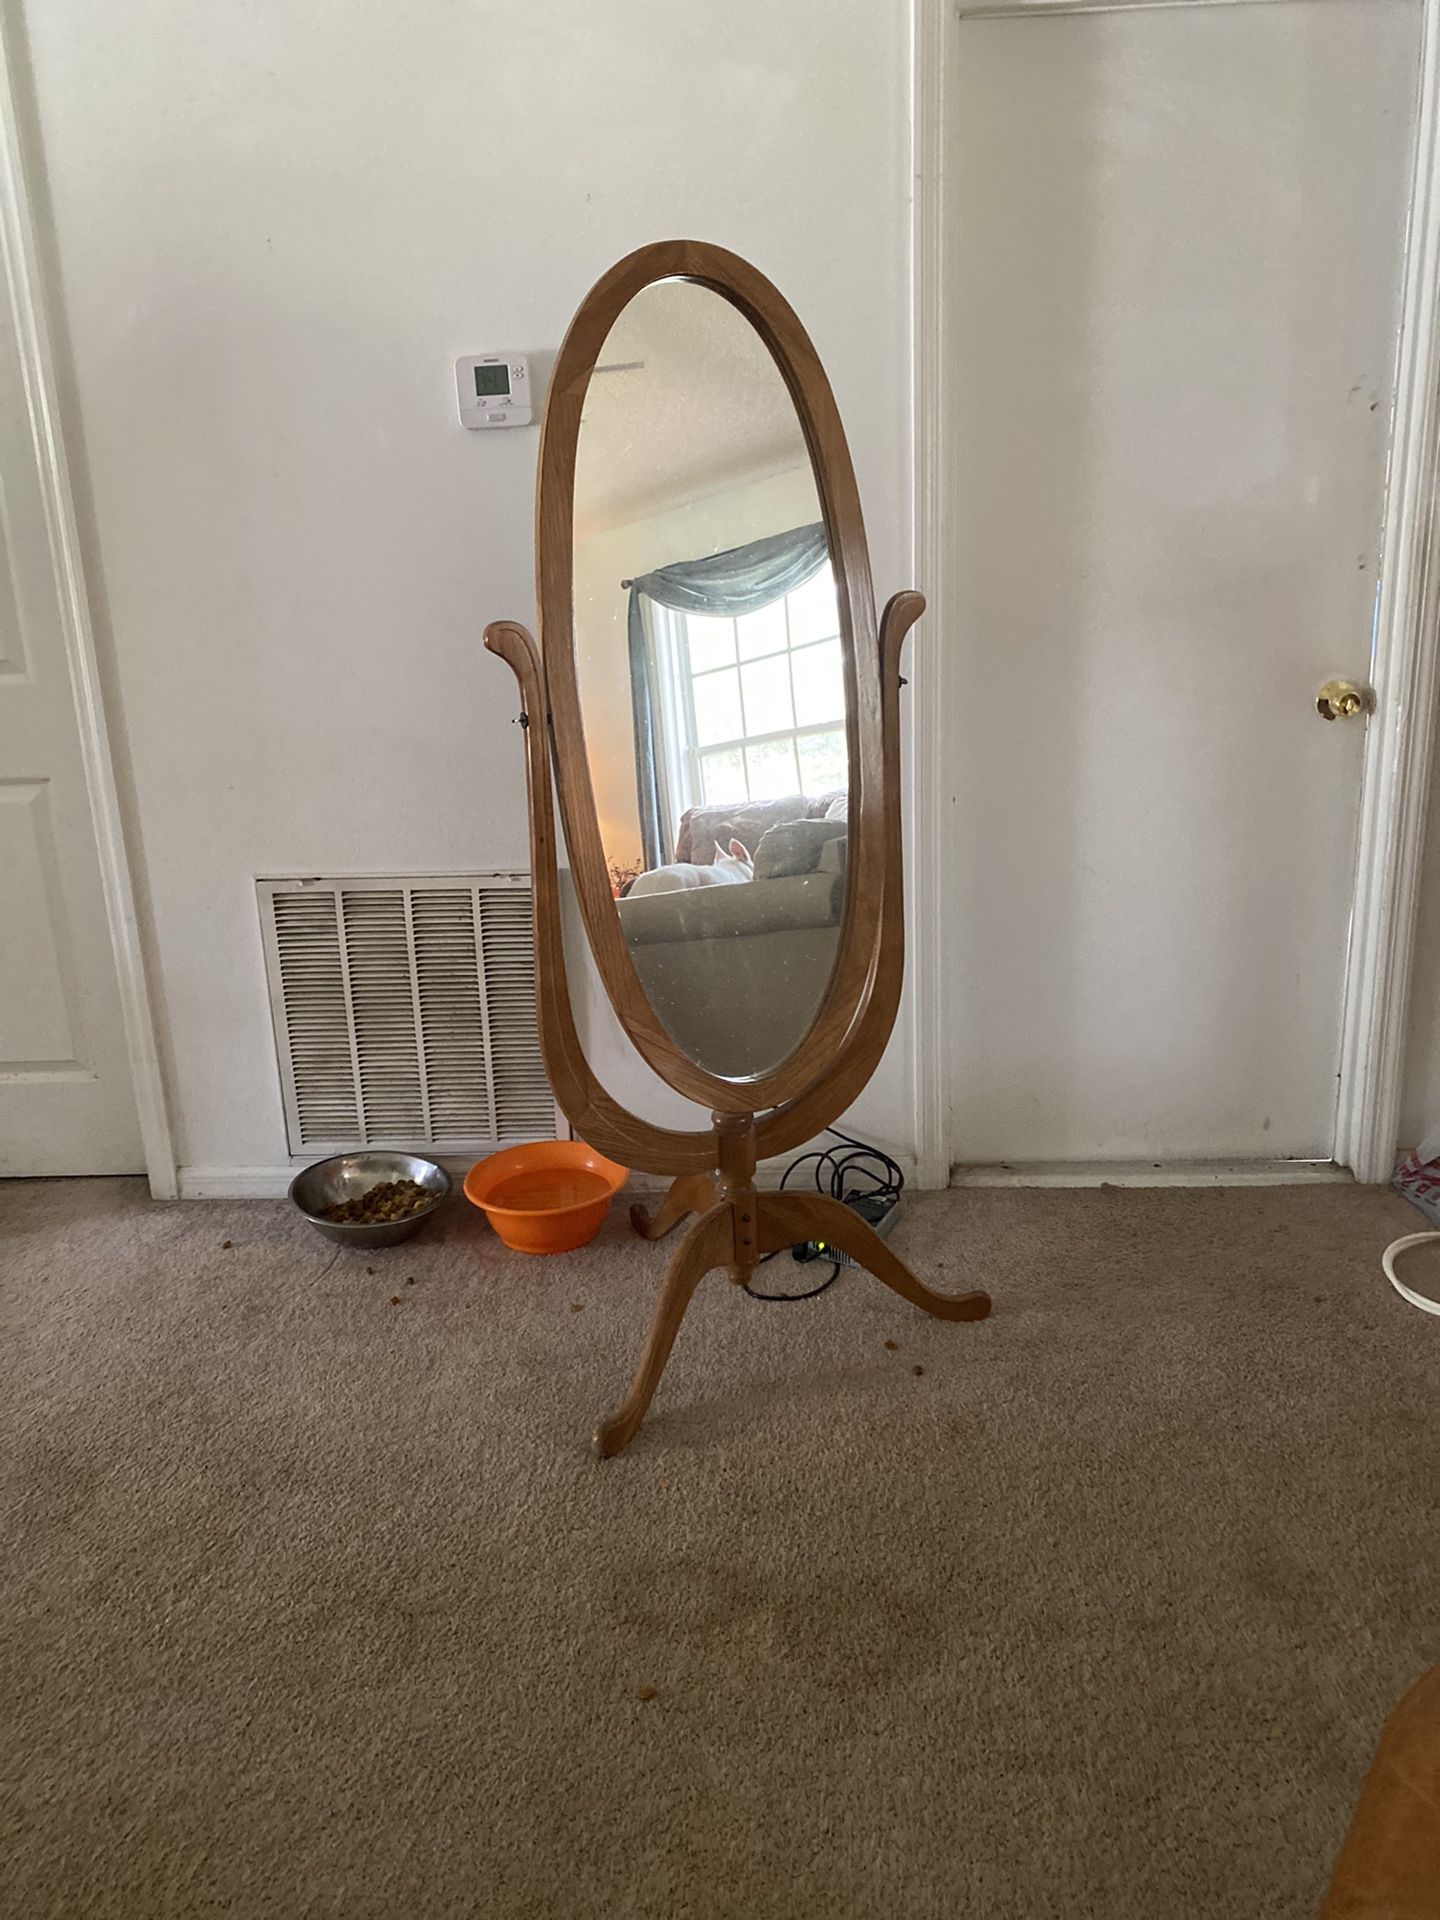 A stand up mirror